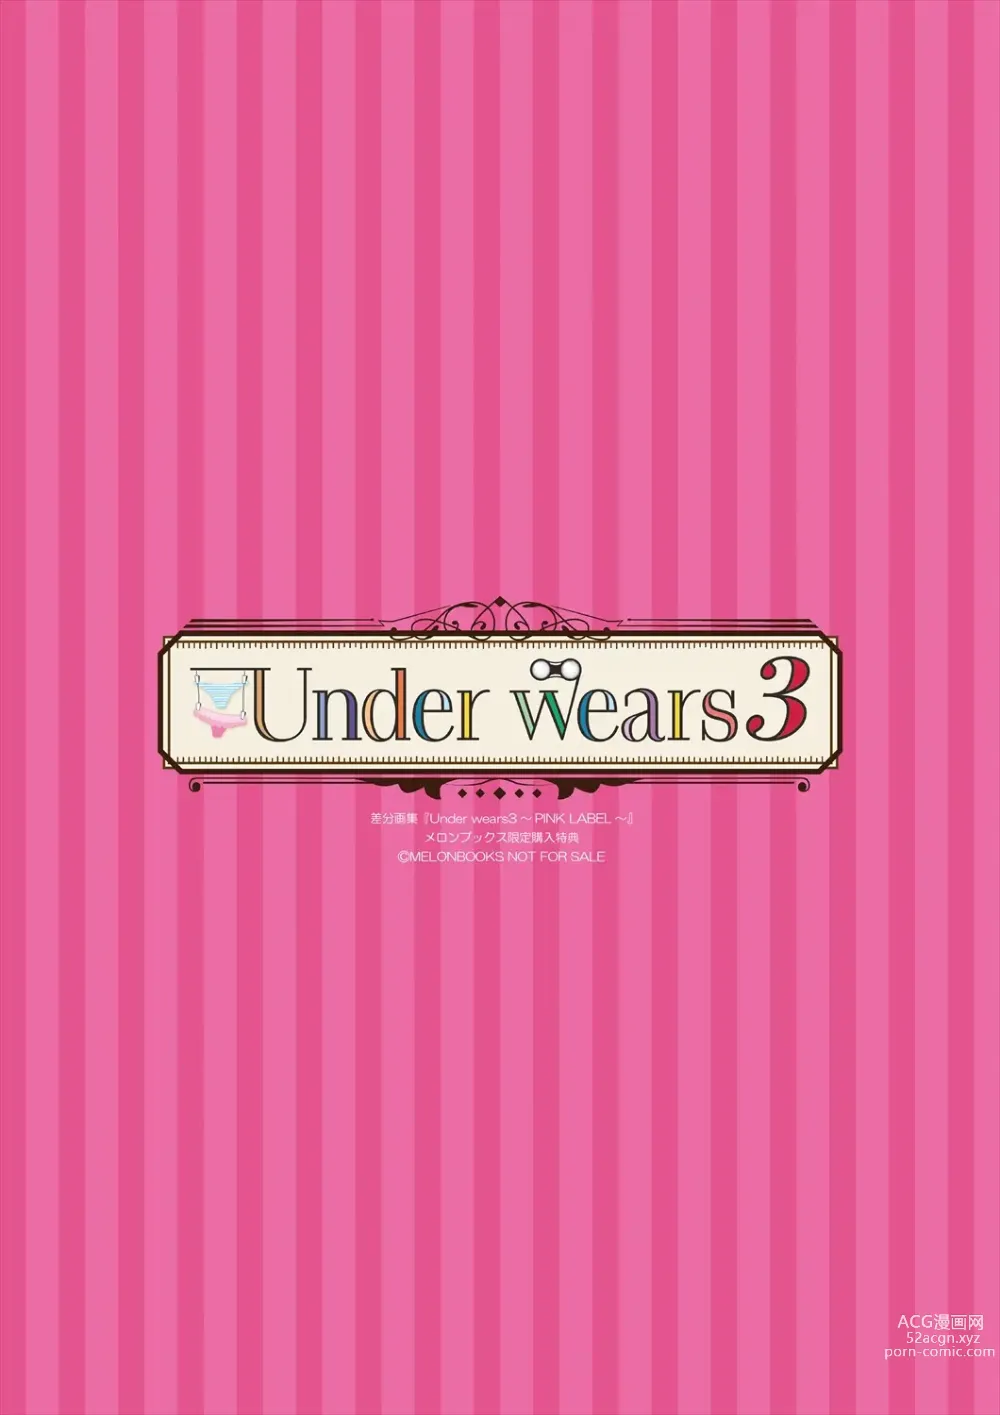 Page 263 of manga Melonbooks - Under wears 3 -PINK LAVBL-